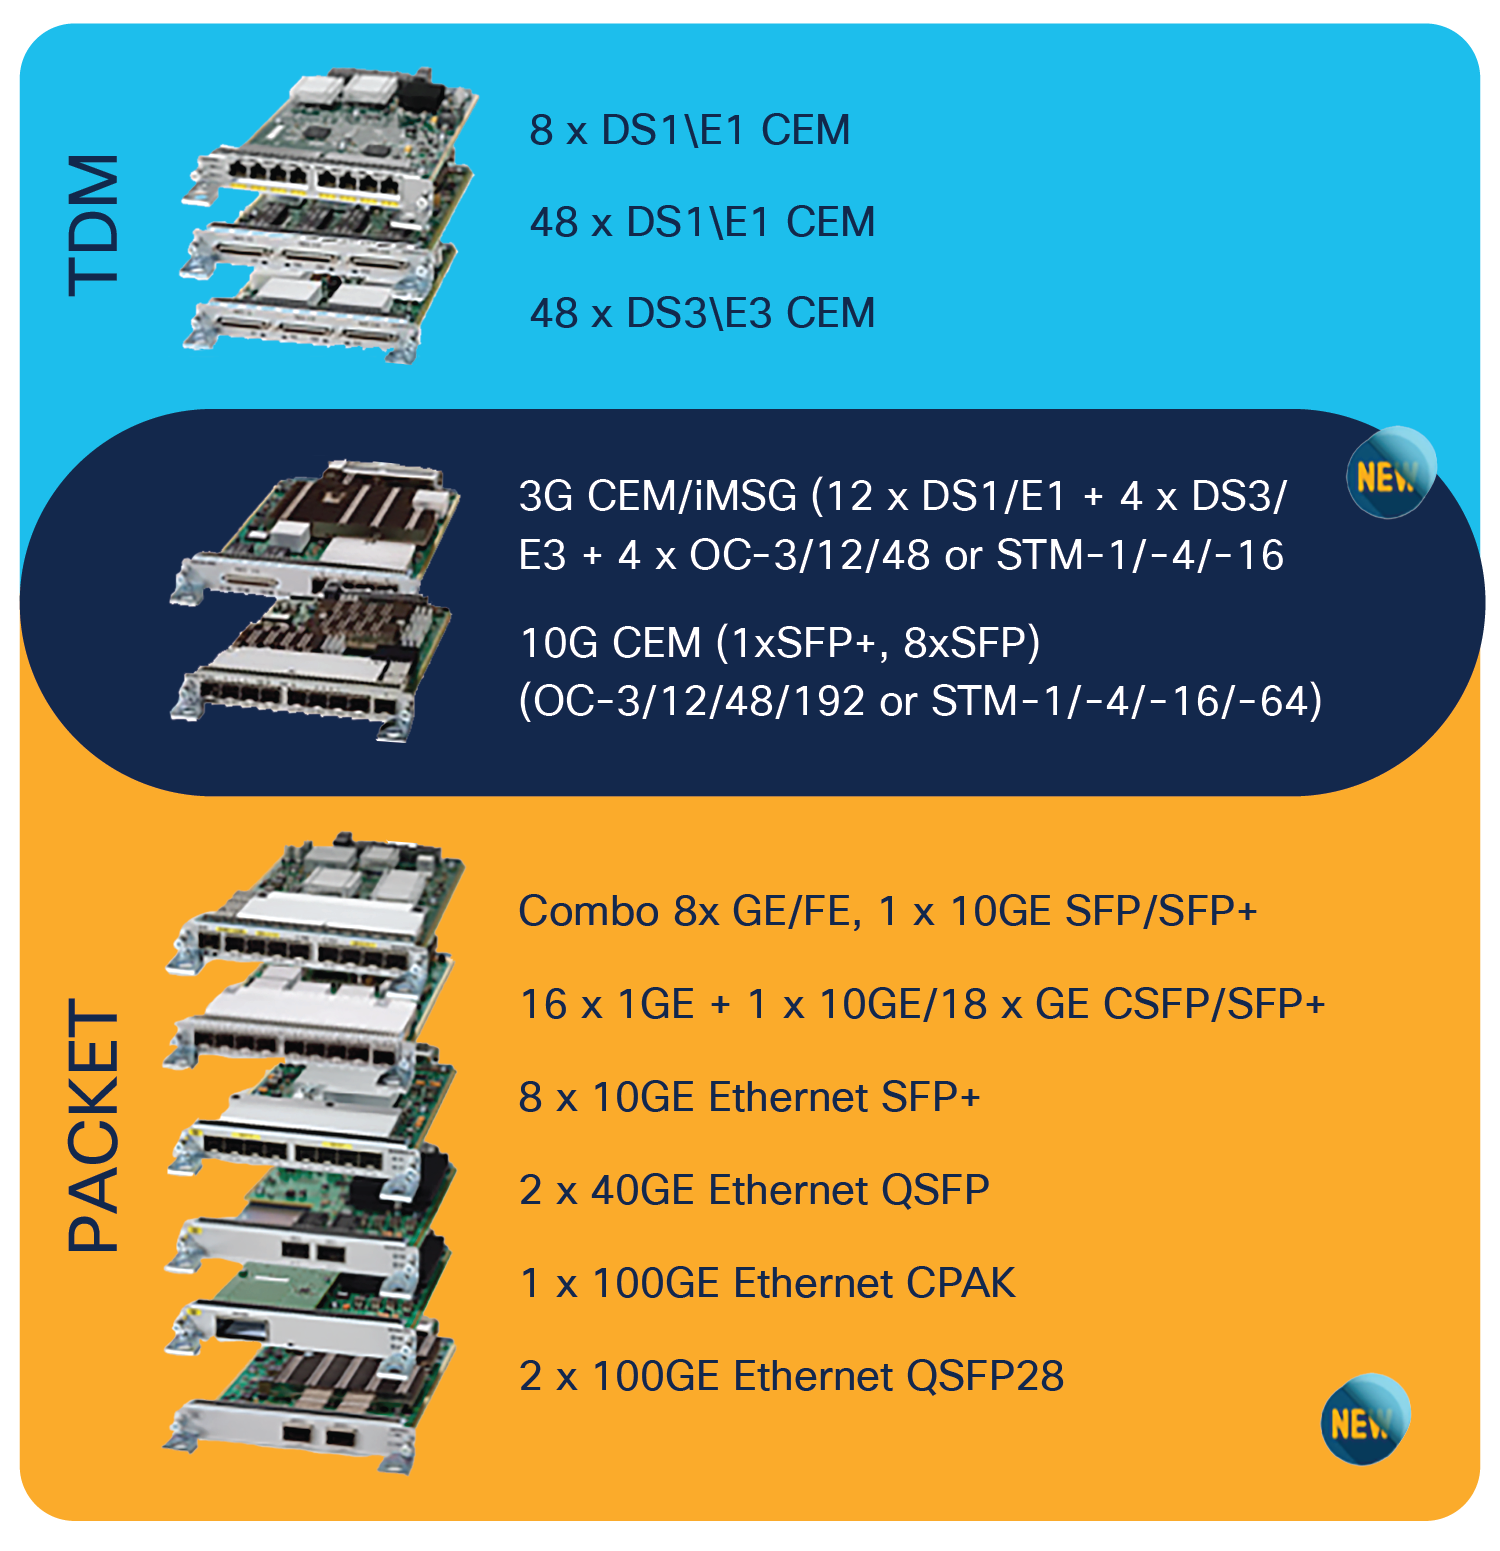 Selection of Cisco NCS 4200 Series Interface Modules